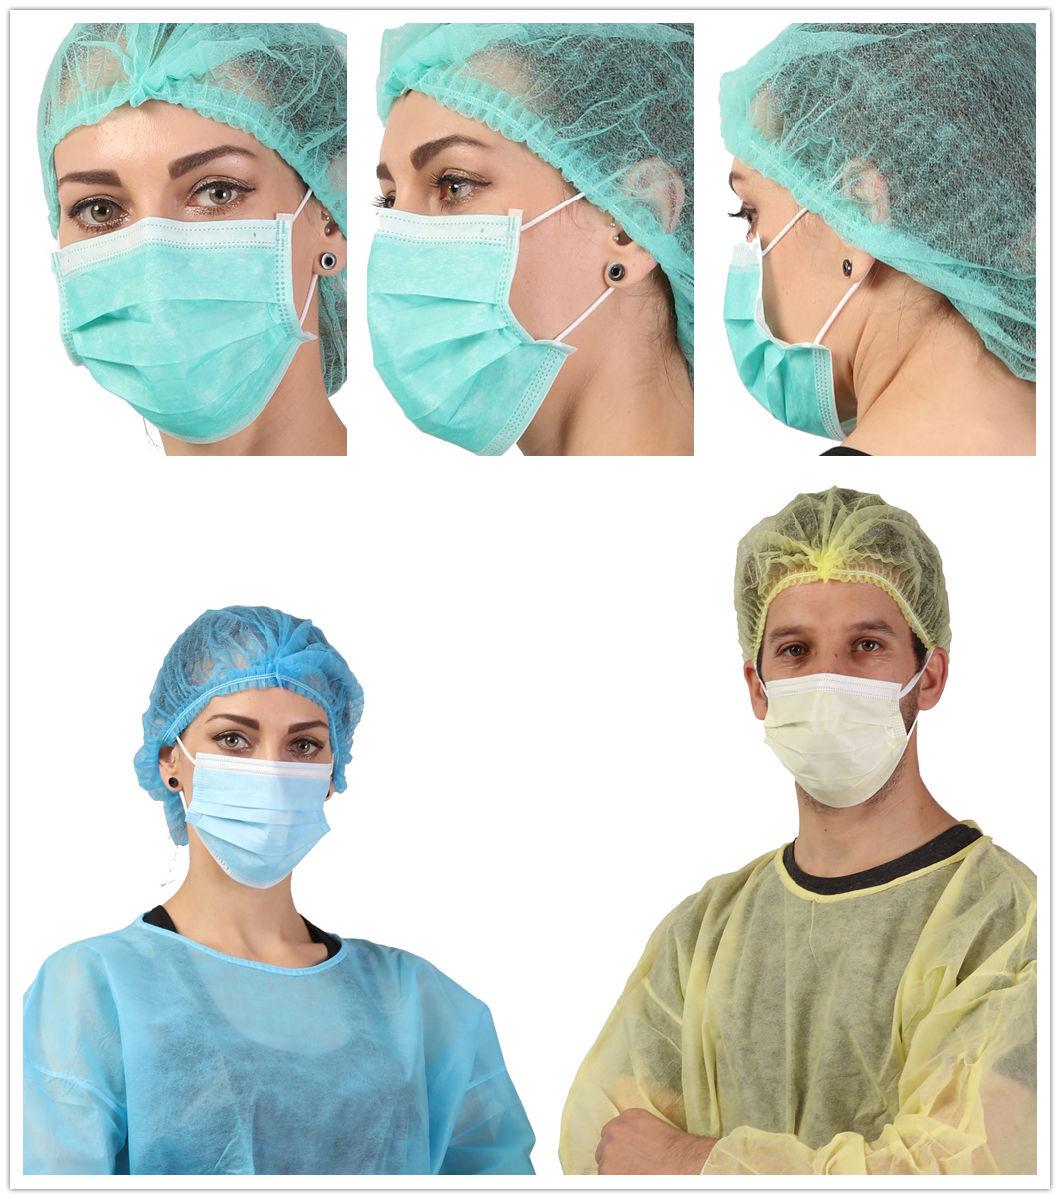 3 Layers China Design Cloth Face Cover Medical Mask with Protective Nose Clip